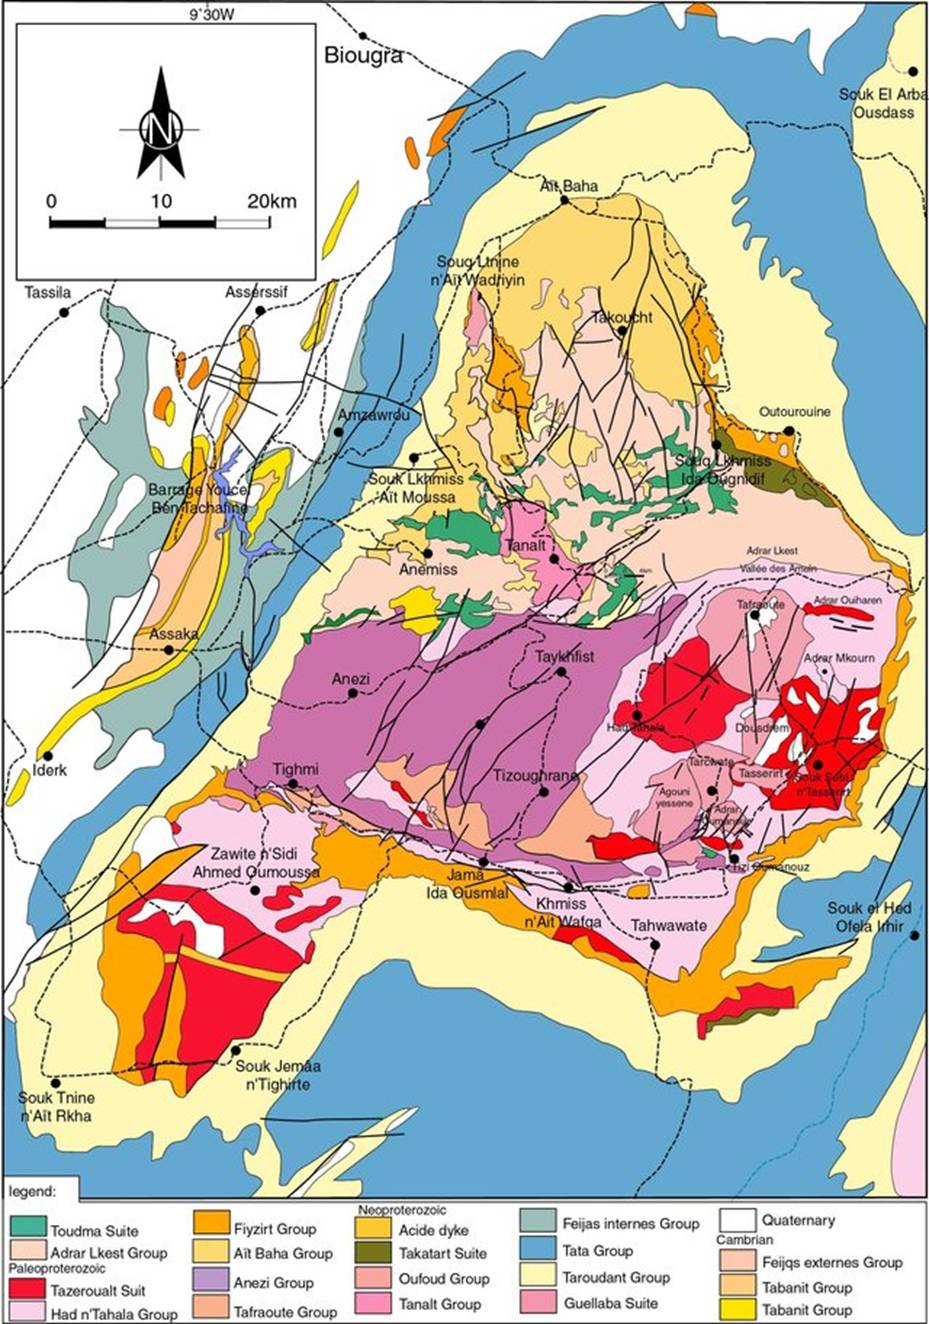 https://www.researchgate.net/profile/Soulaimani_Abderrahmane/publication/313695514/figure/fig8/AS:668592215437319@1536416214600/Simplified-geological-map-of-the-Kerdous-Precambrian-inlier-redrawn-from-the-geological_W640.jpg